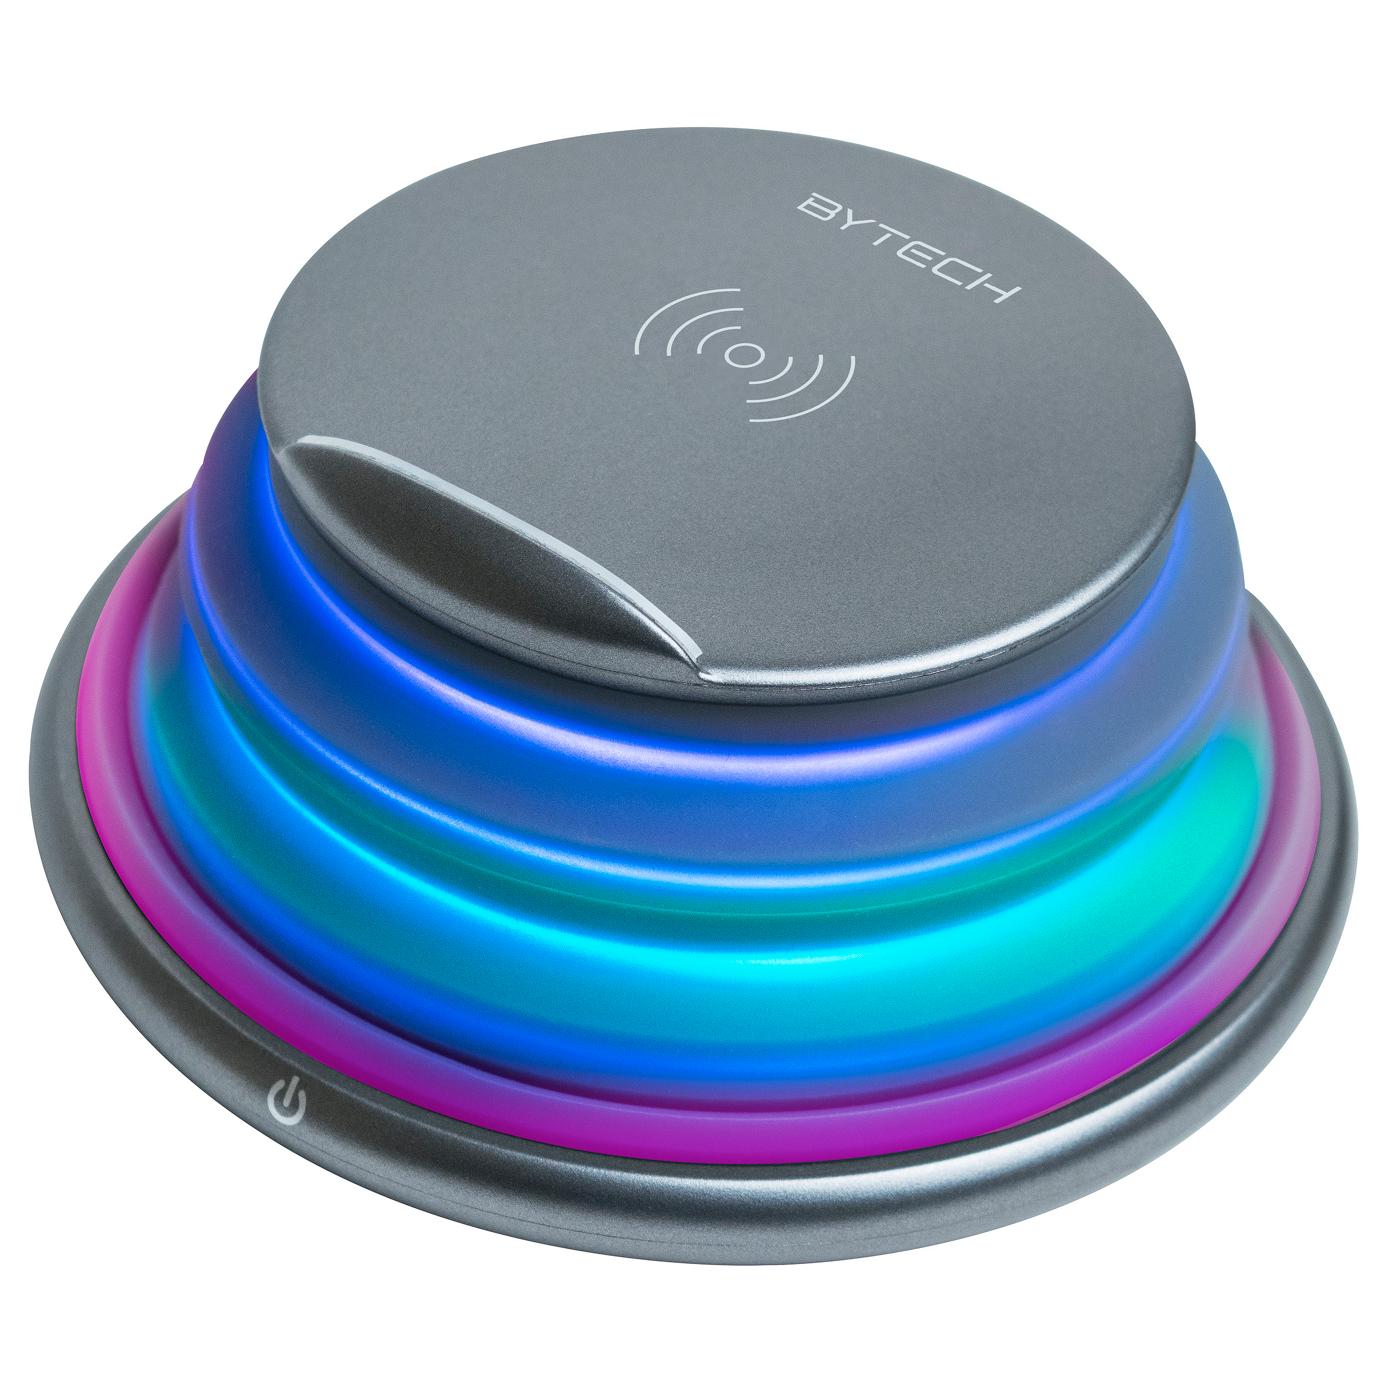 Bytech Pop Up Wireless Charging Pad with Color Changing Lights; image 2 of 2